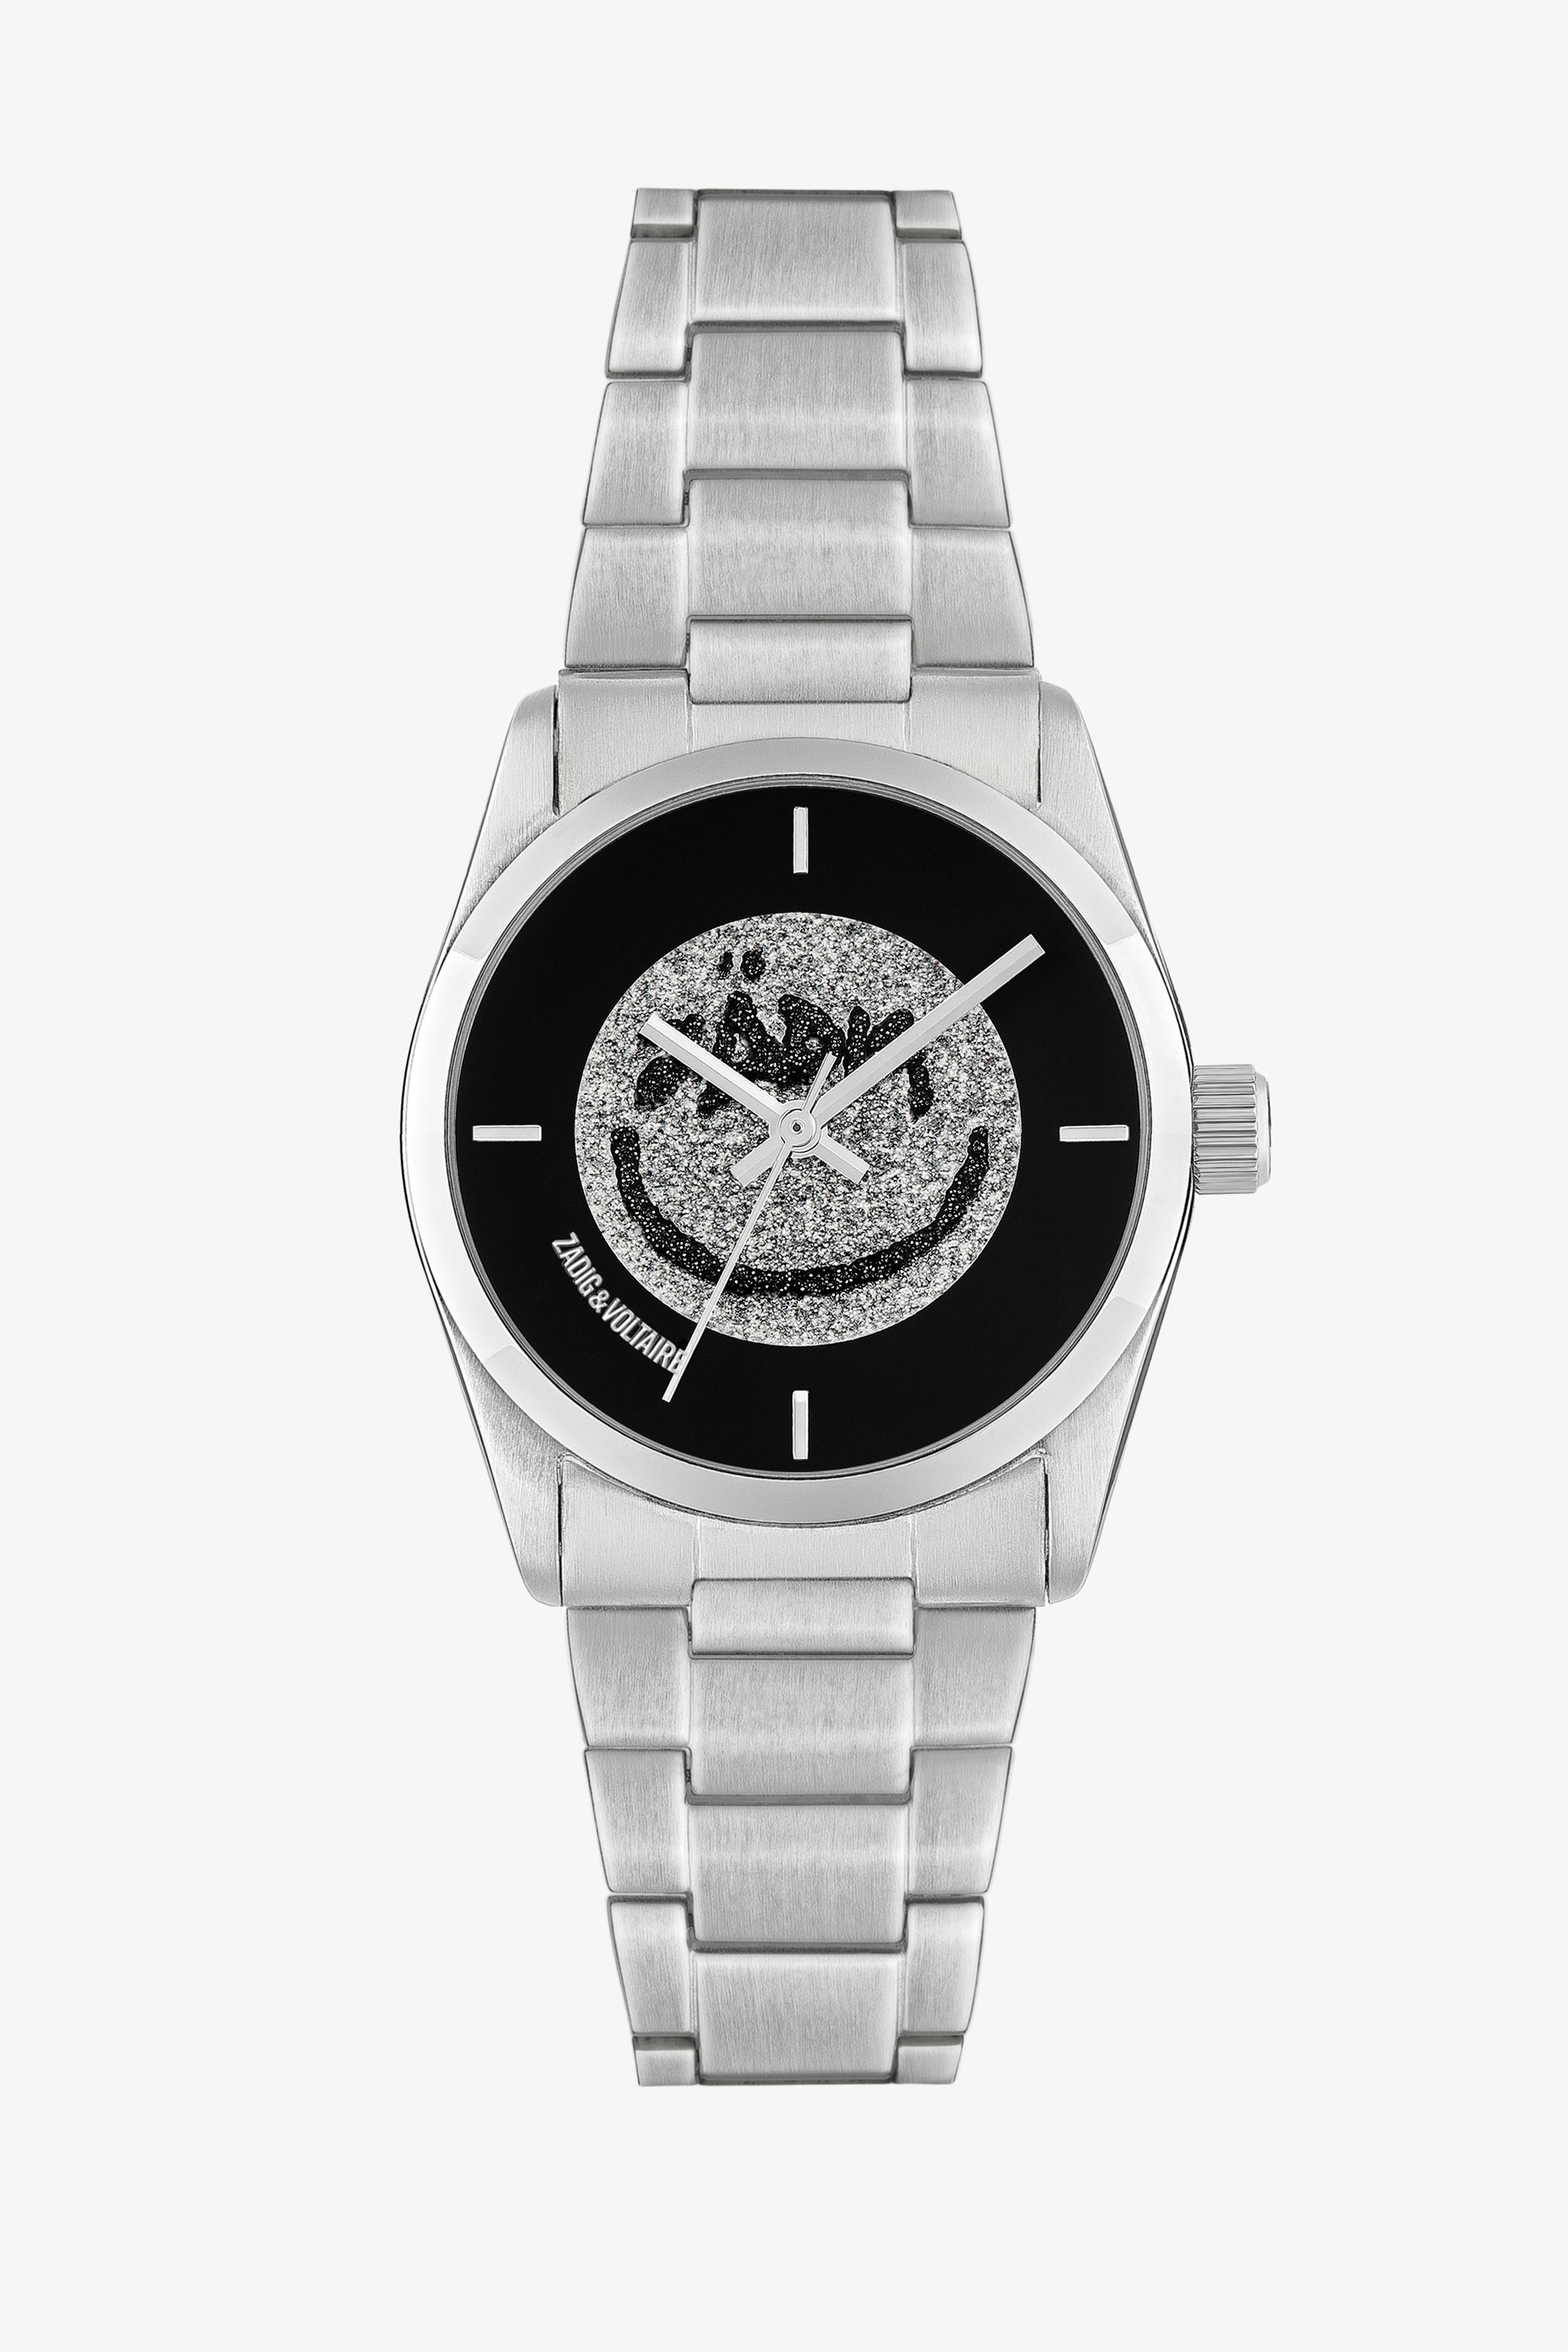 Fusion Happy Glitter Watch Women’s silver-tone steel watch featuring a black dial with happy glitter background